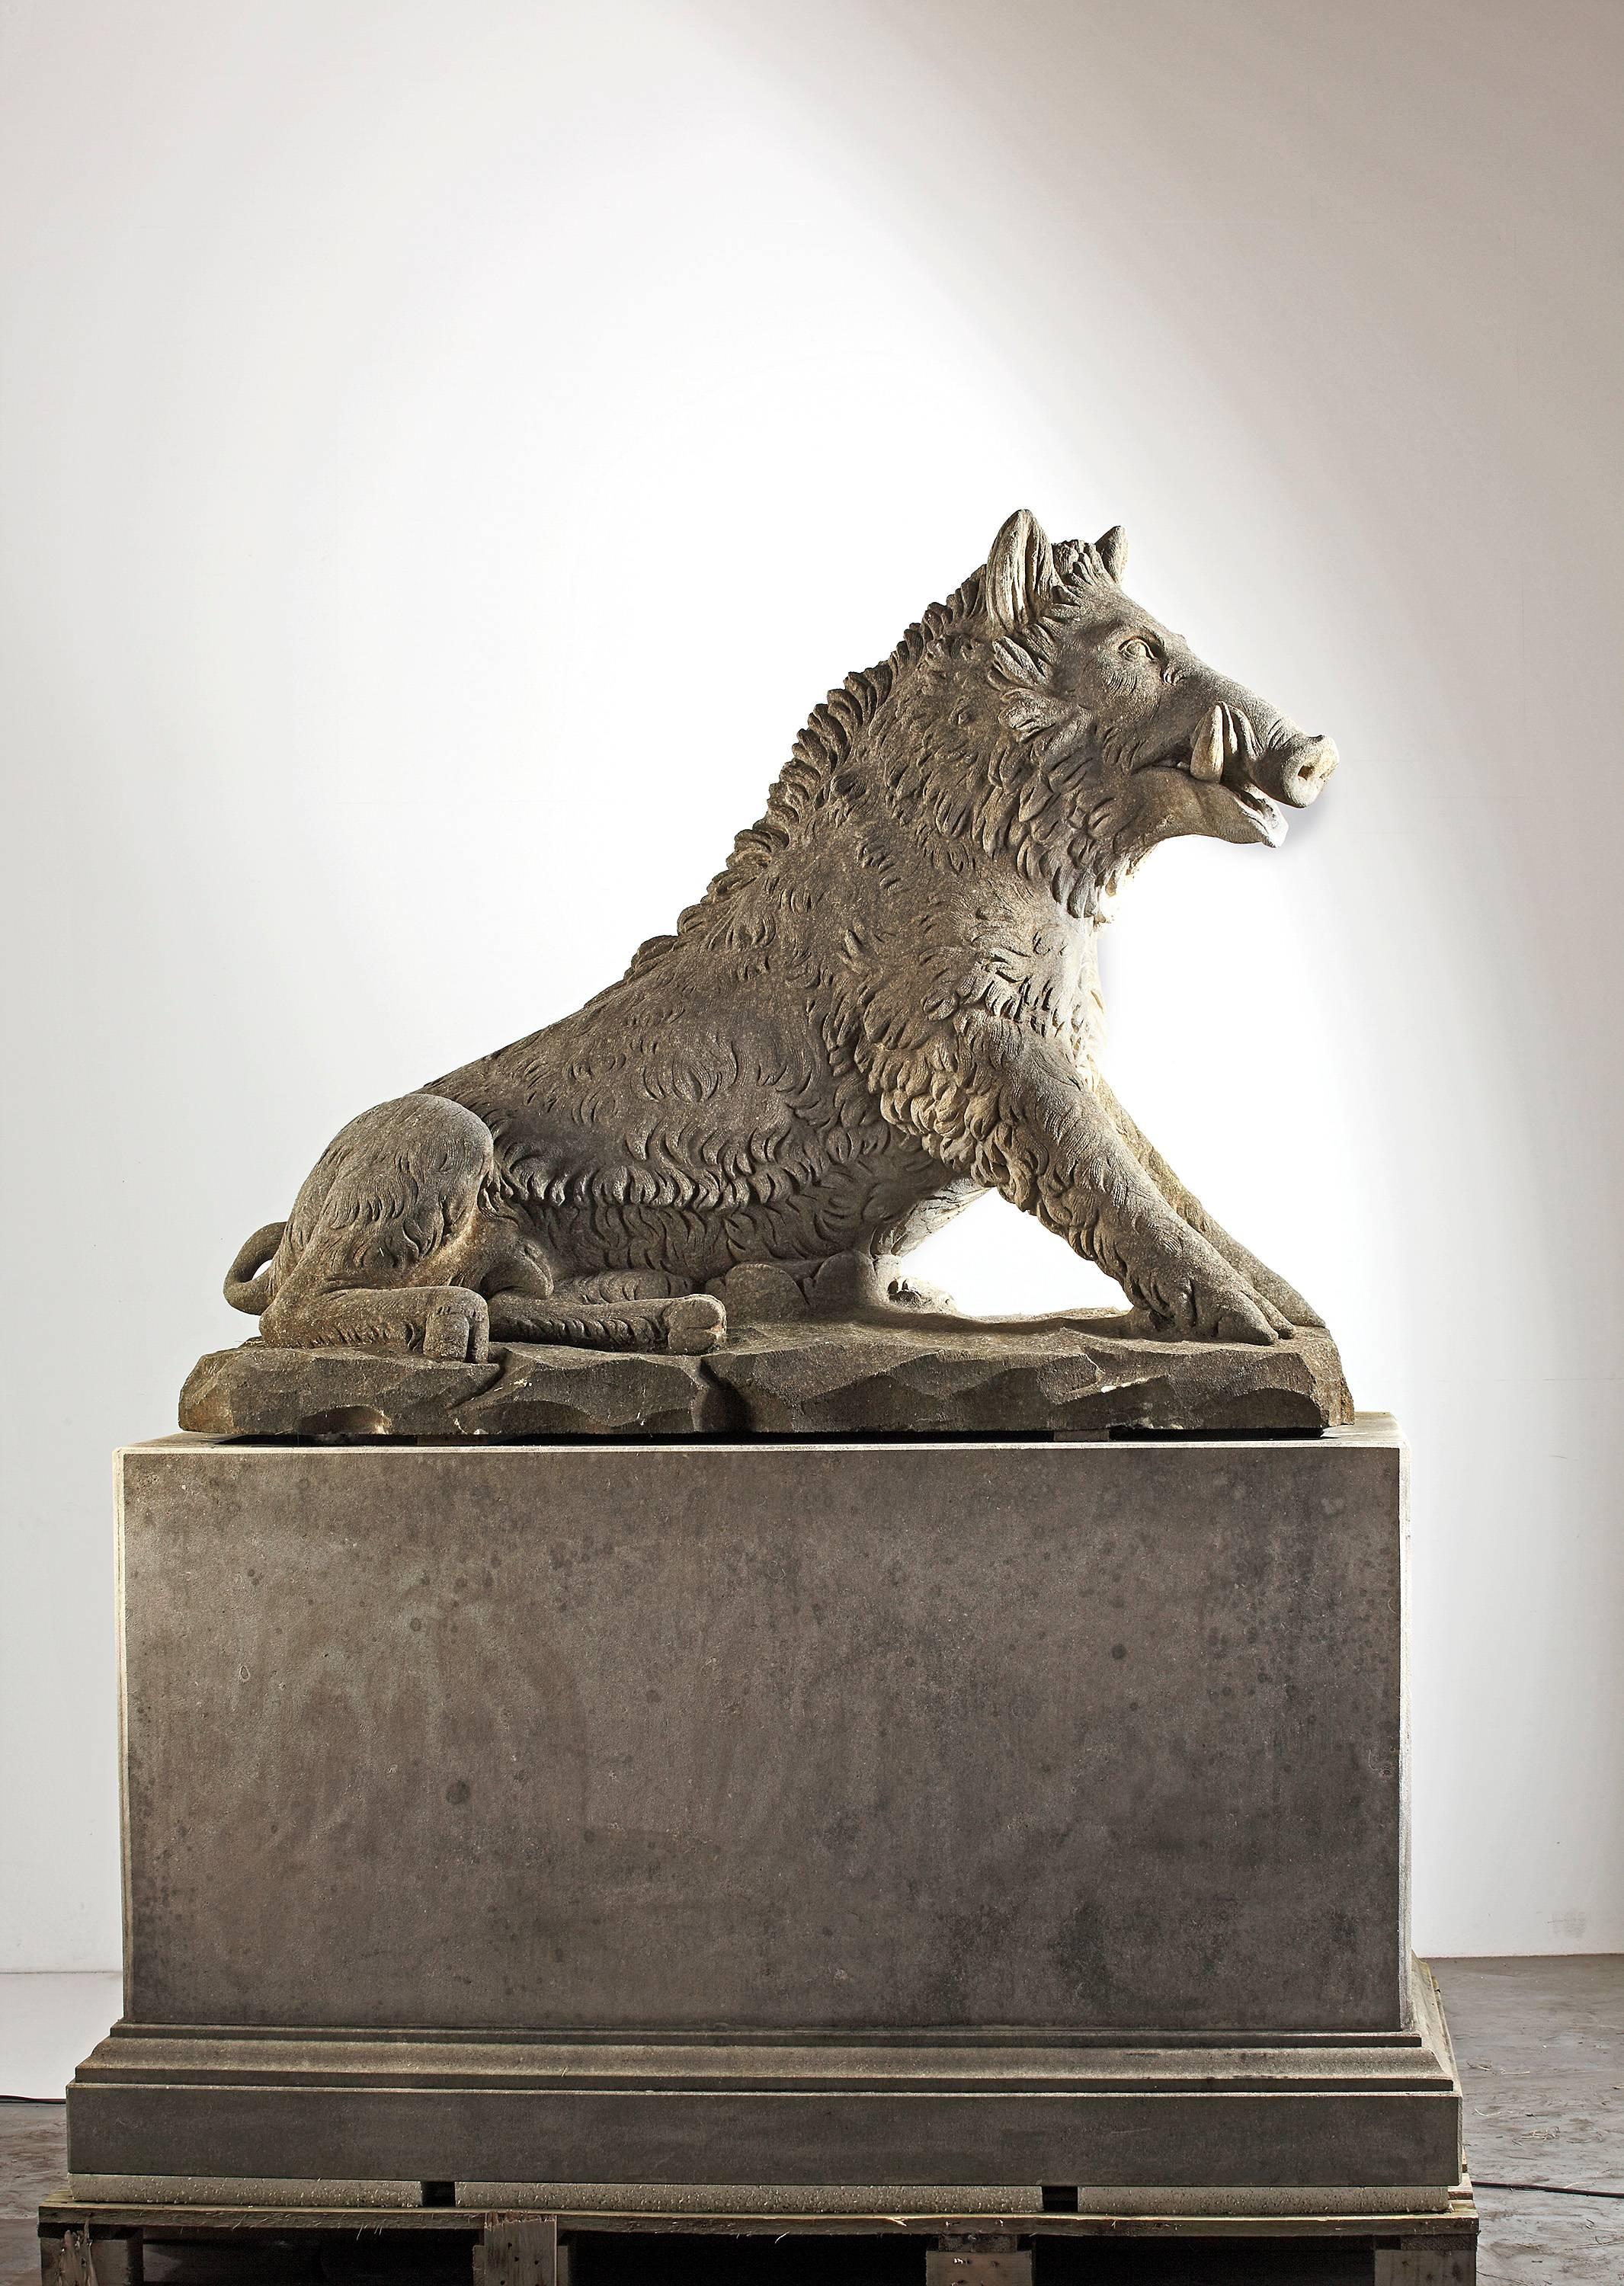 Portrayed seated on a rectangular rockwork base.

The Calydonian Boar is one of the monsters of the Greek mythology. The boar was sent by Artemis to Ravage the region of Calydon in Aetolia. It met its end in the Calydonian hunt, in which all the